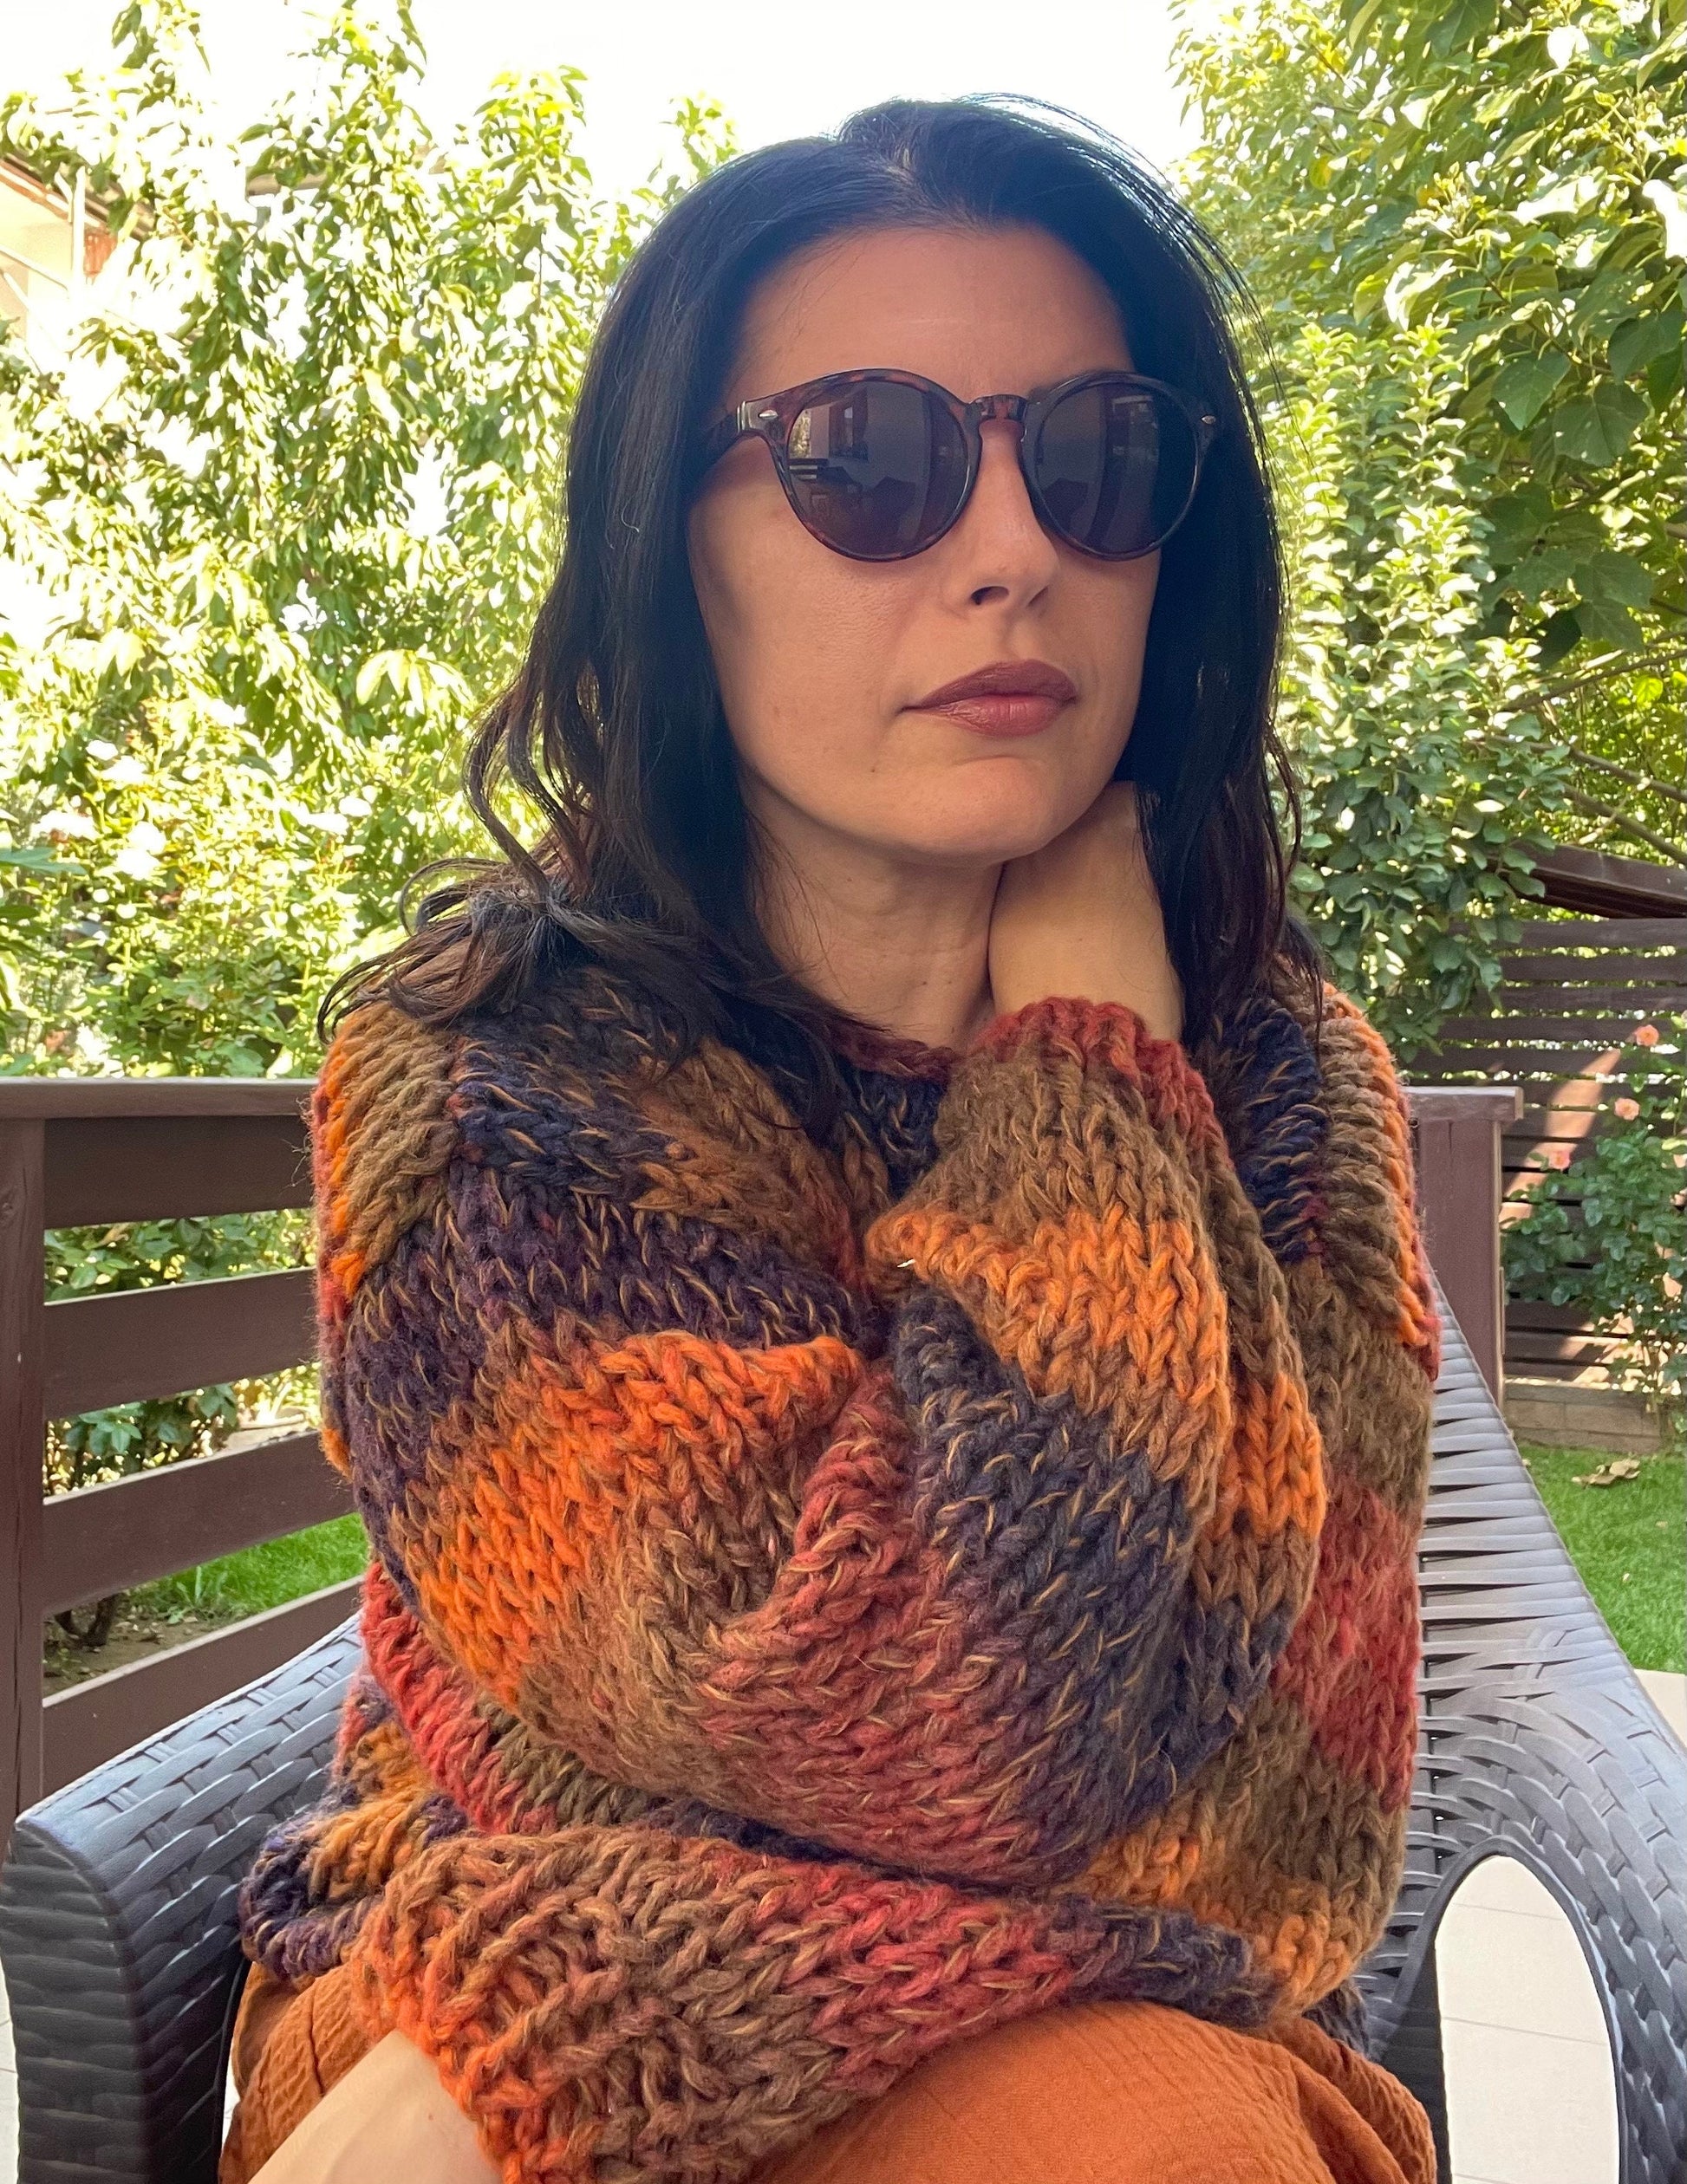 AUTUMN Chunky Sweater, Hand Knit Jumper, Autumn Colours Sweater, Burnt Orange, Blue, Purple Sweater, Ready to Ship, Copper Chunky Cardigan